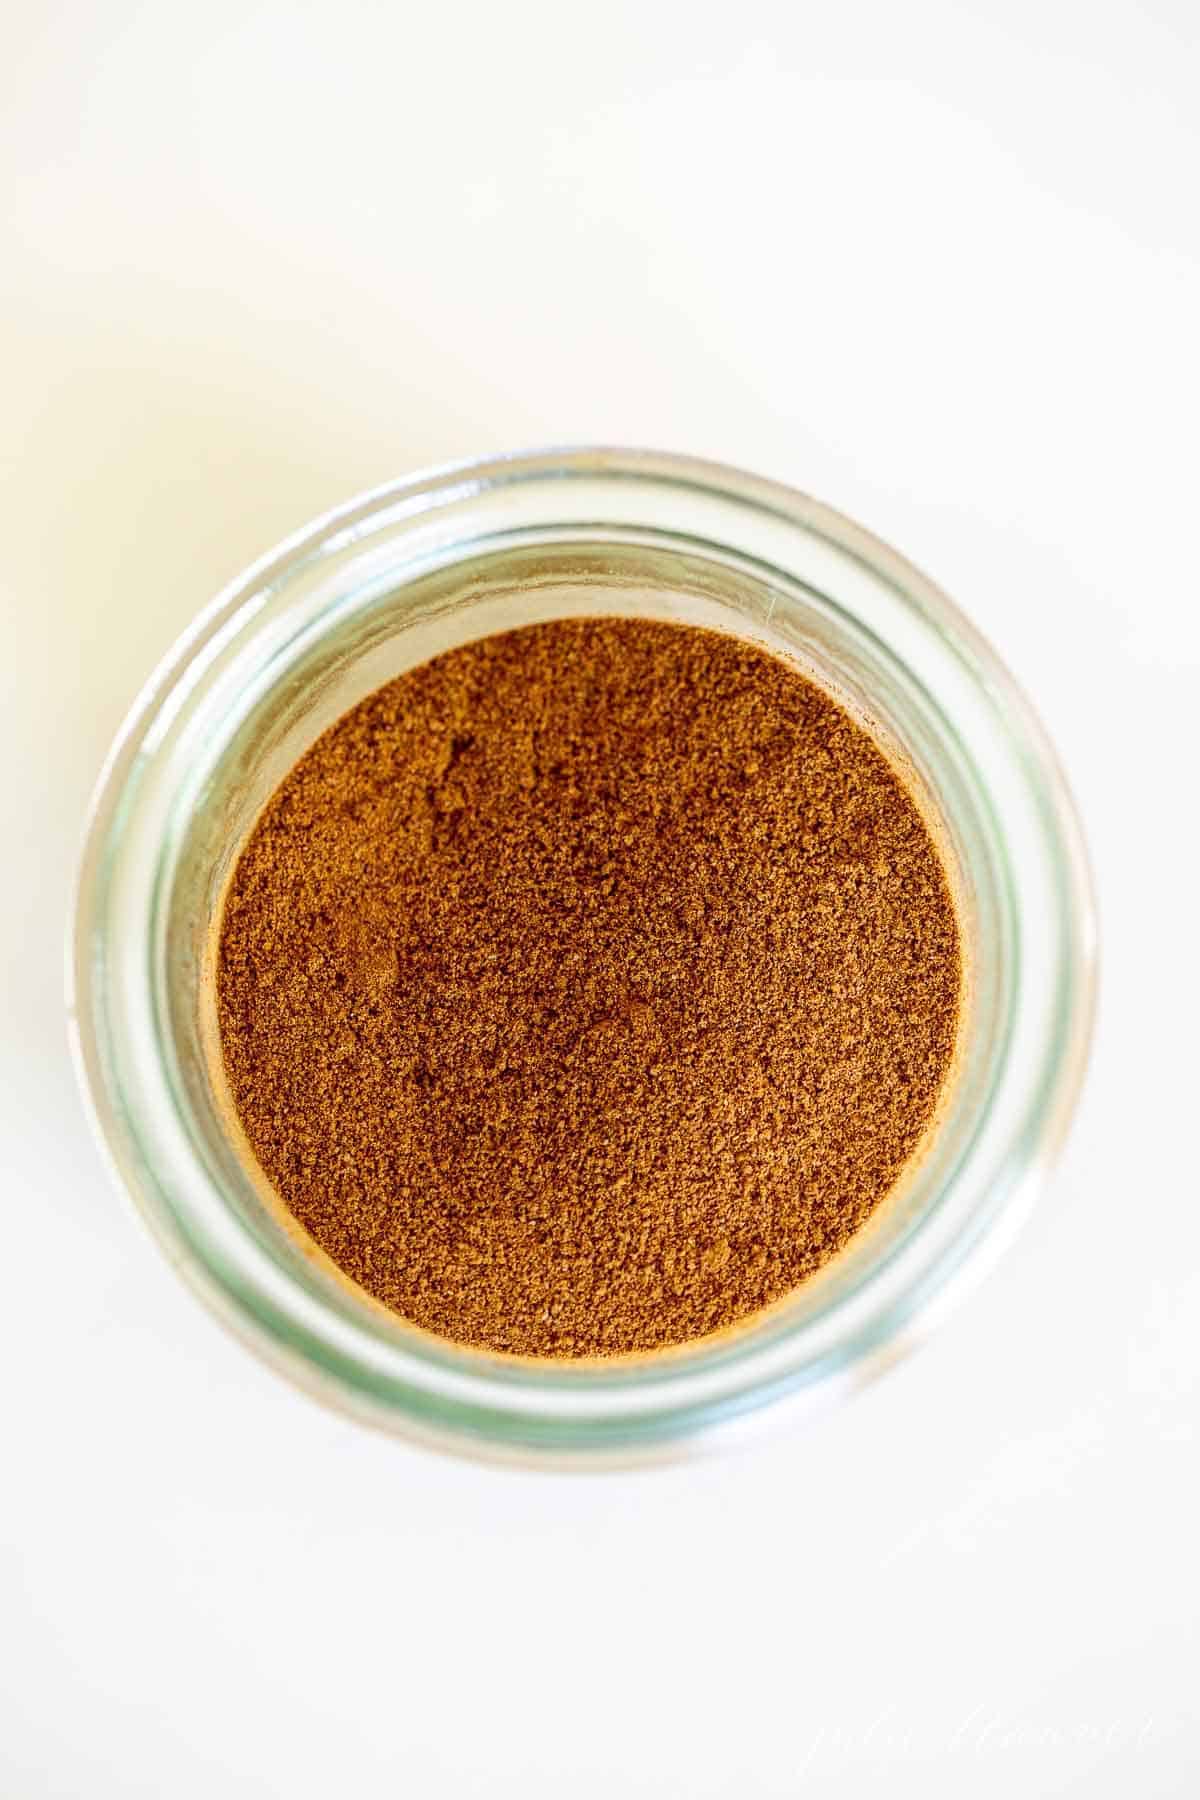 A small clear jar filled with a homemade apple pie spice blend.